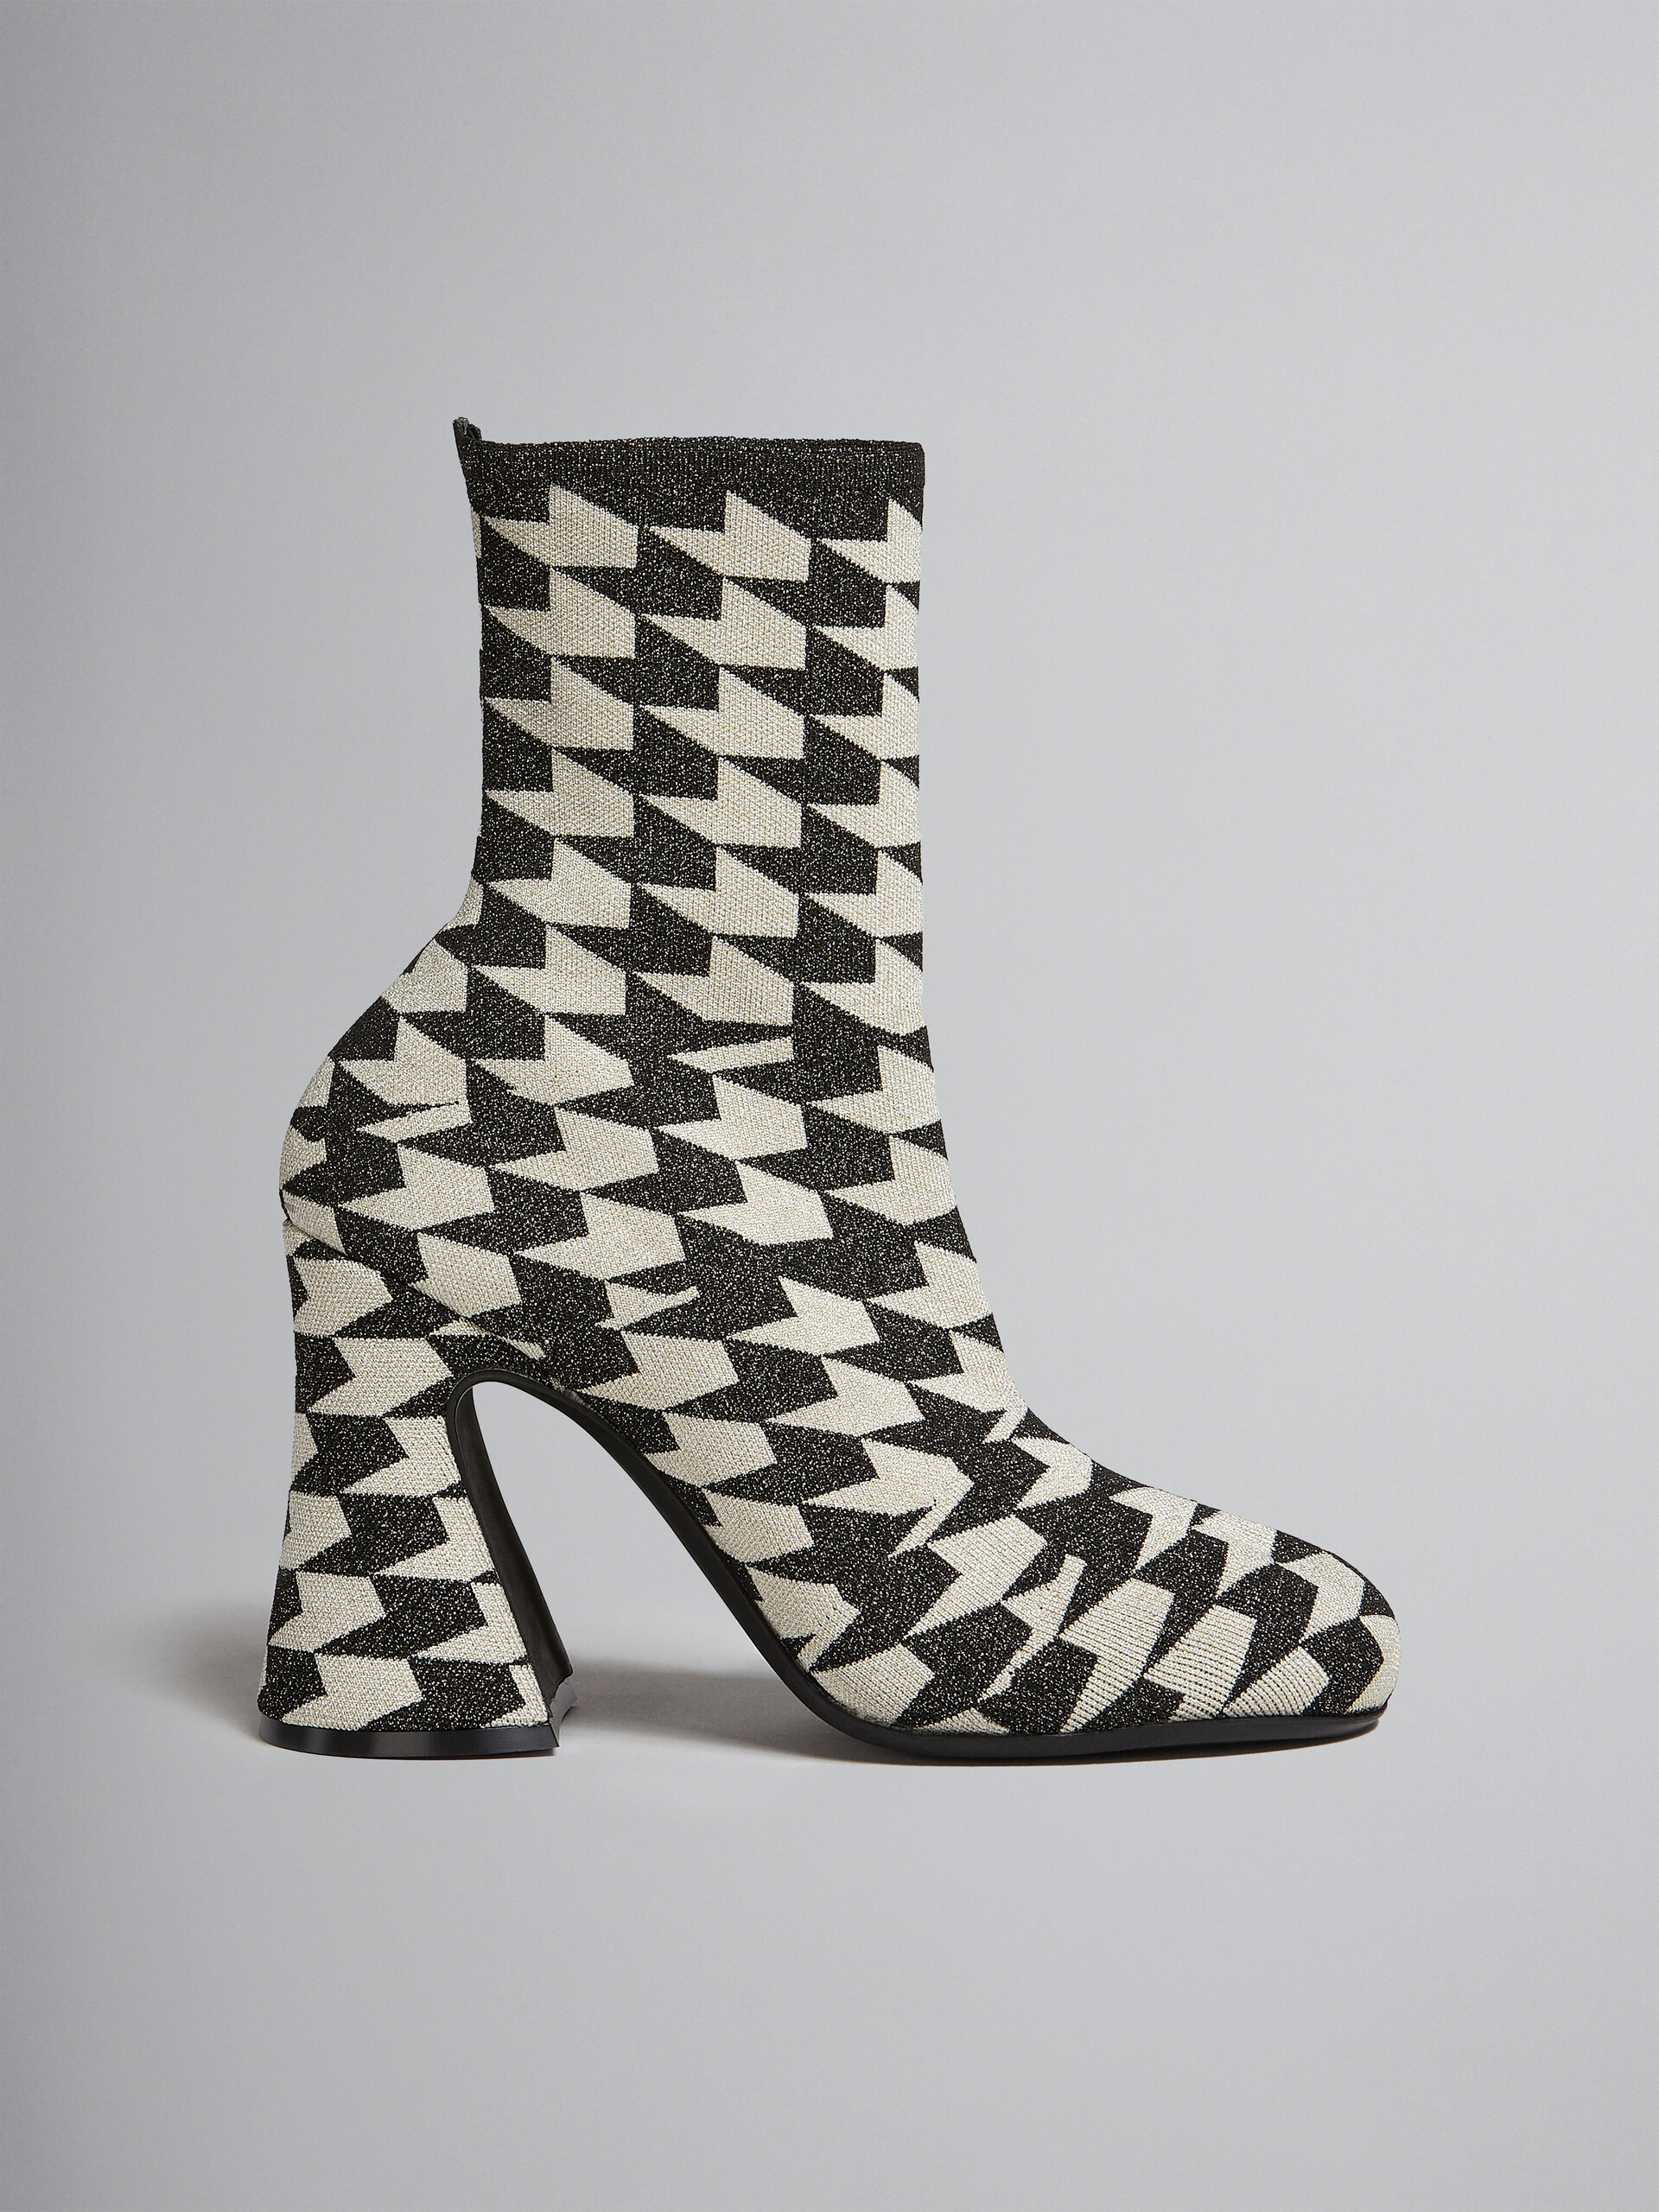 Black and white jacquard lurex ankle boot - Boots - Image 1